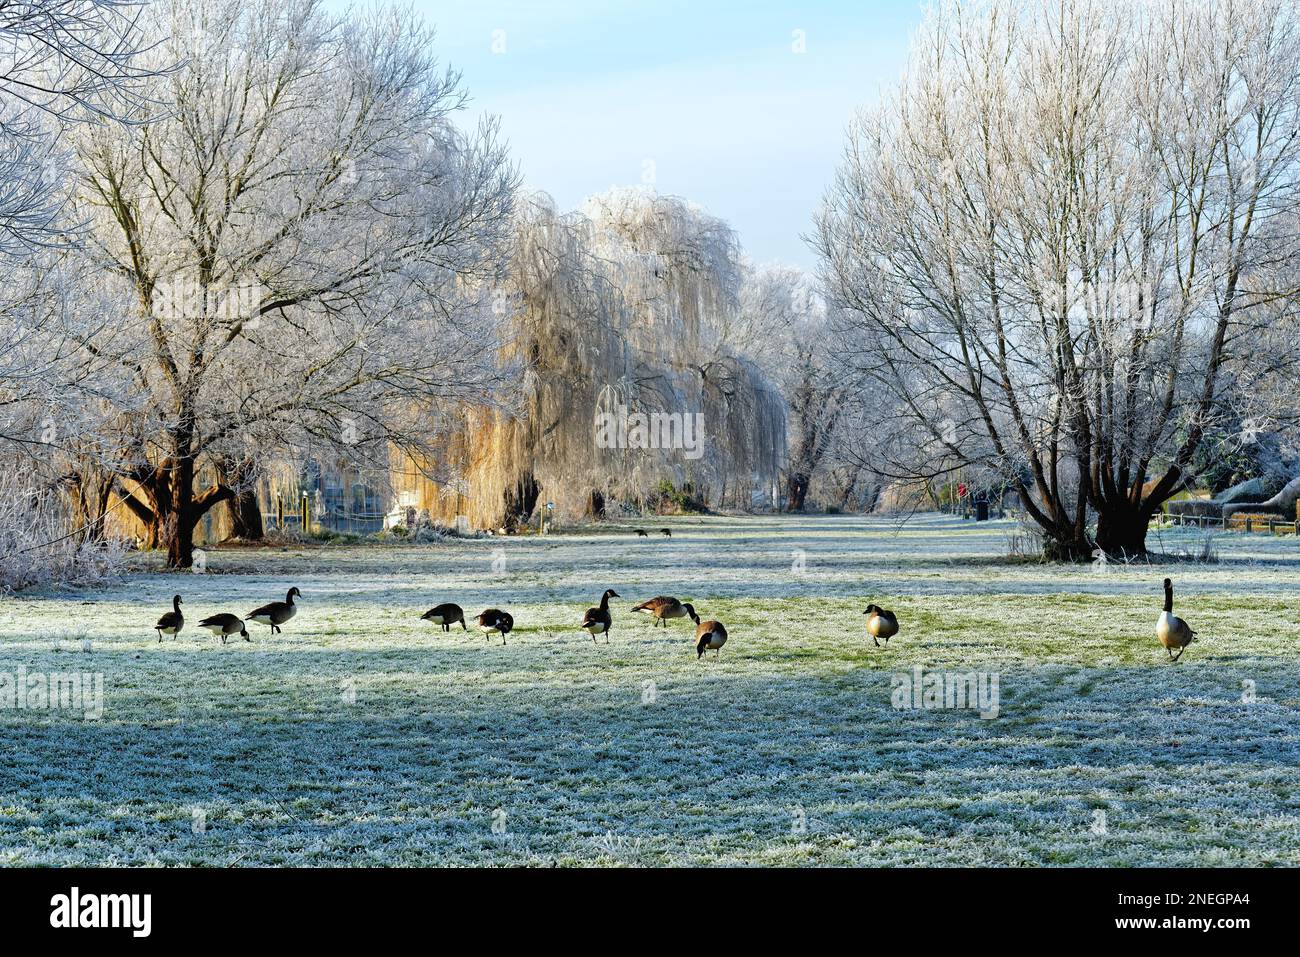 The riverside at Shepperton on a cold sunny winters day with trees and vegetation covered in hoar frost, Surrey England UK Stock Photo